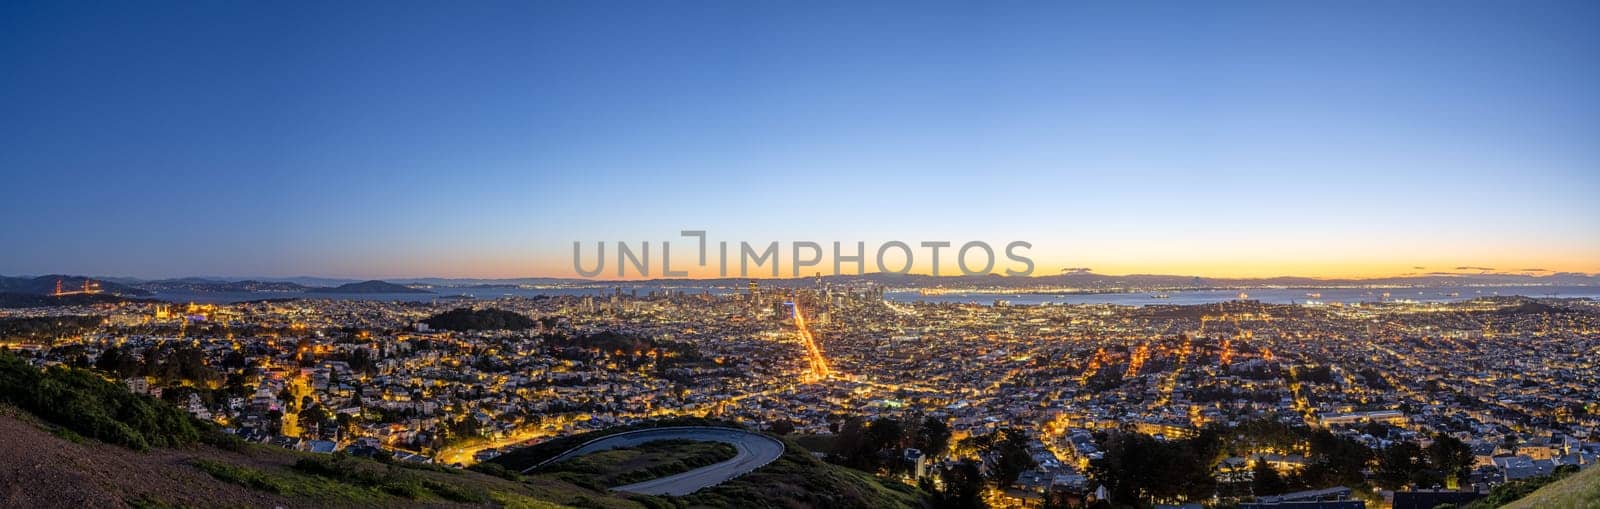 Panorama of the skyline of San Francisco in California before sunrise